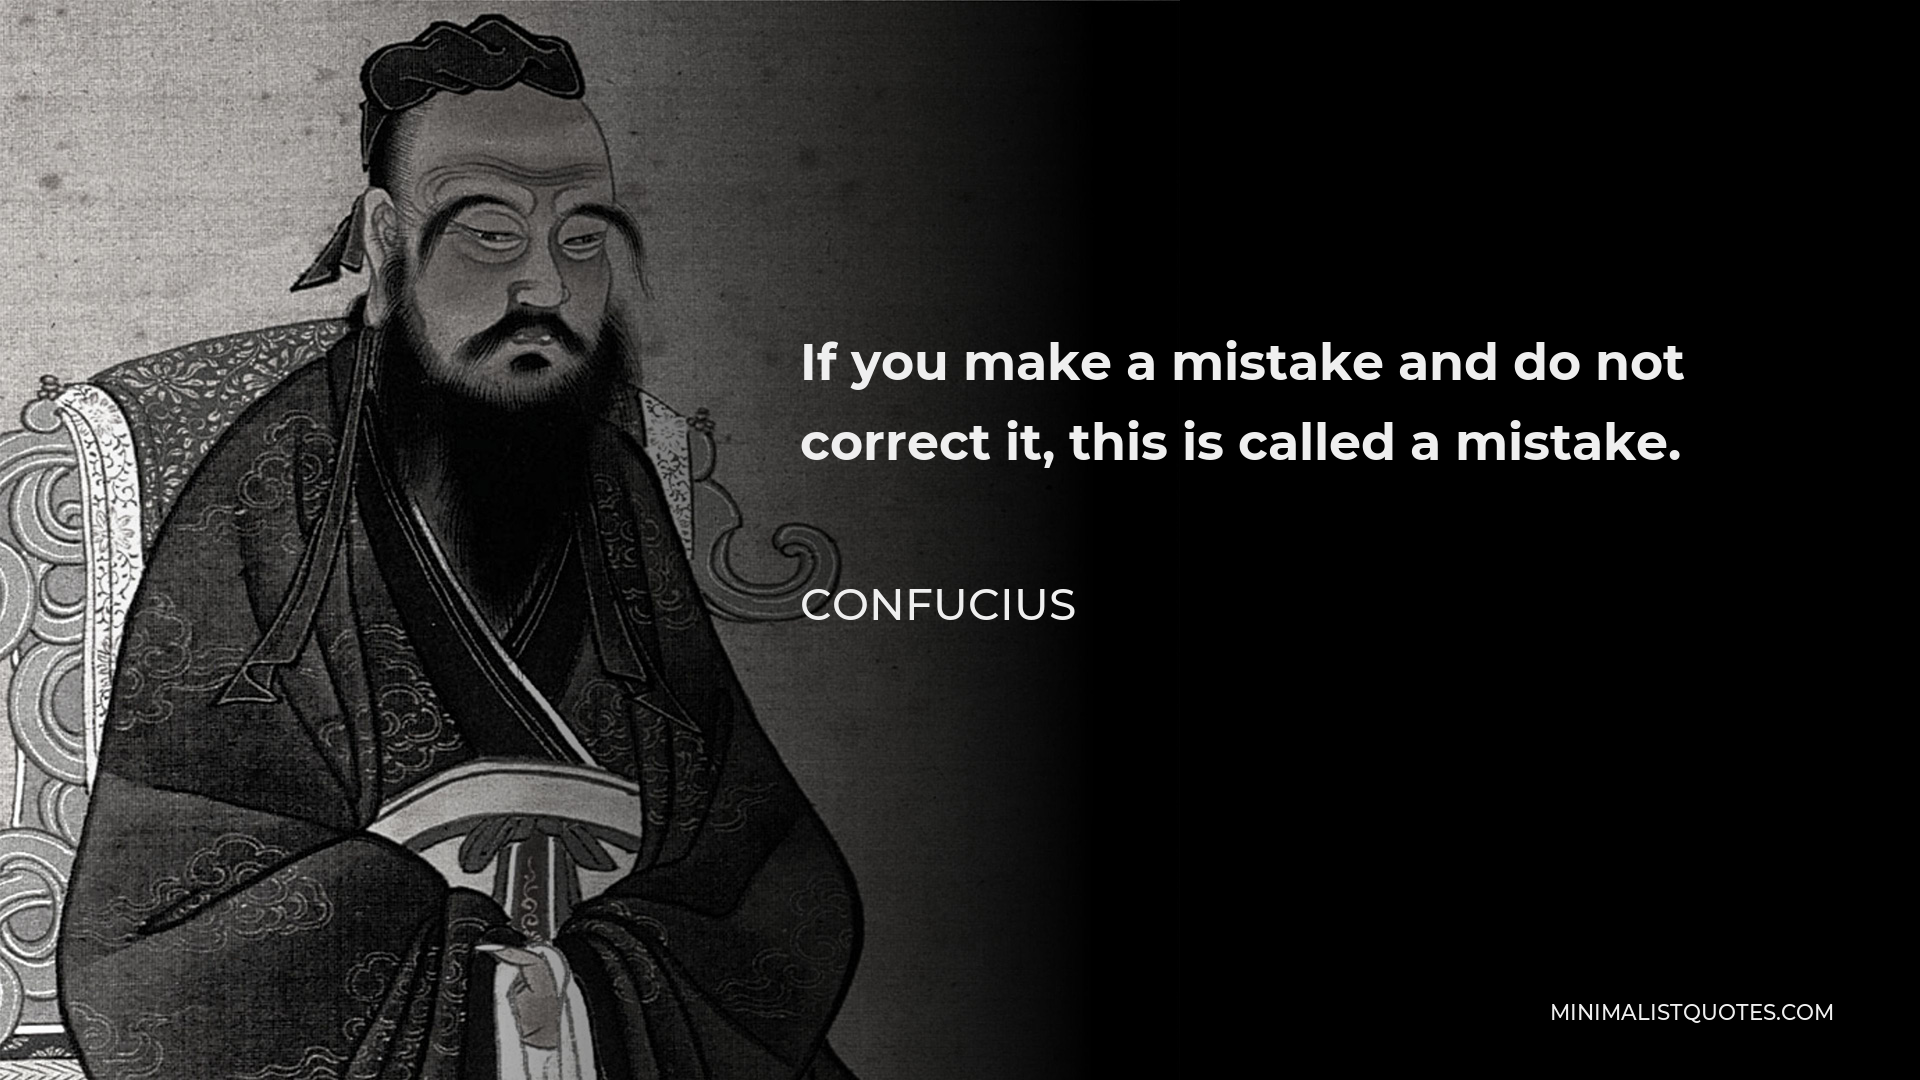 Confucius Quote - If you make a mistake and do not correct it, this is called a mistake.